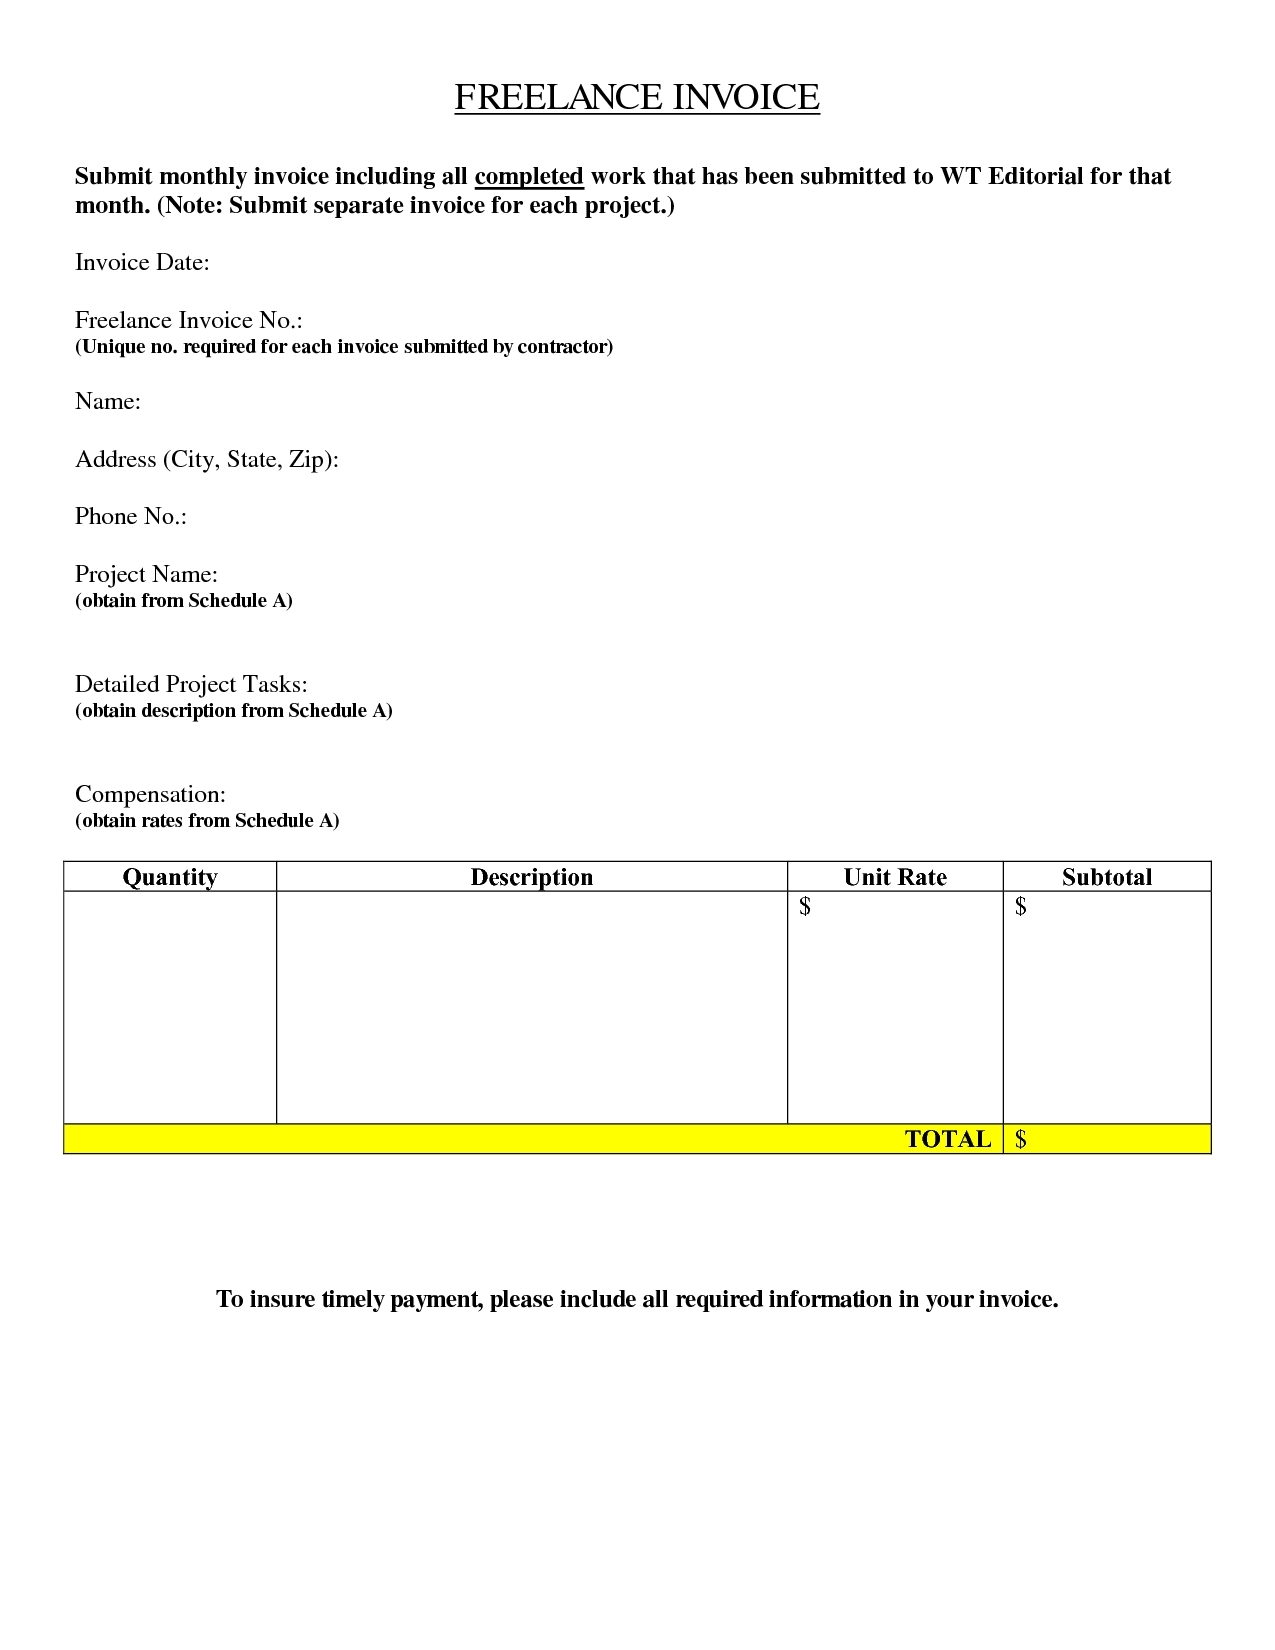 invoice template for freelance work invoice template free 2016 sample invoice for freelance work